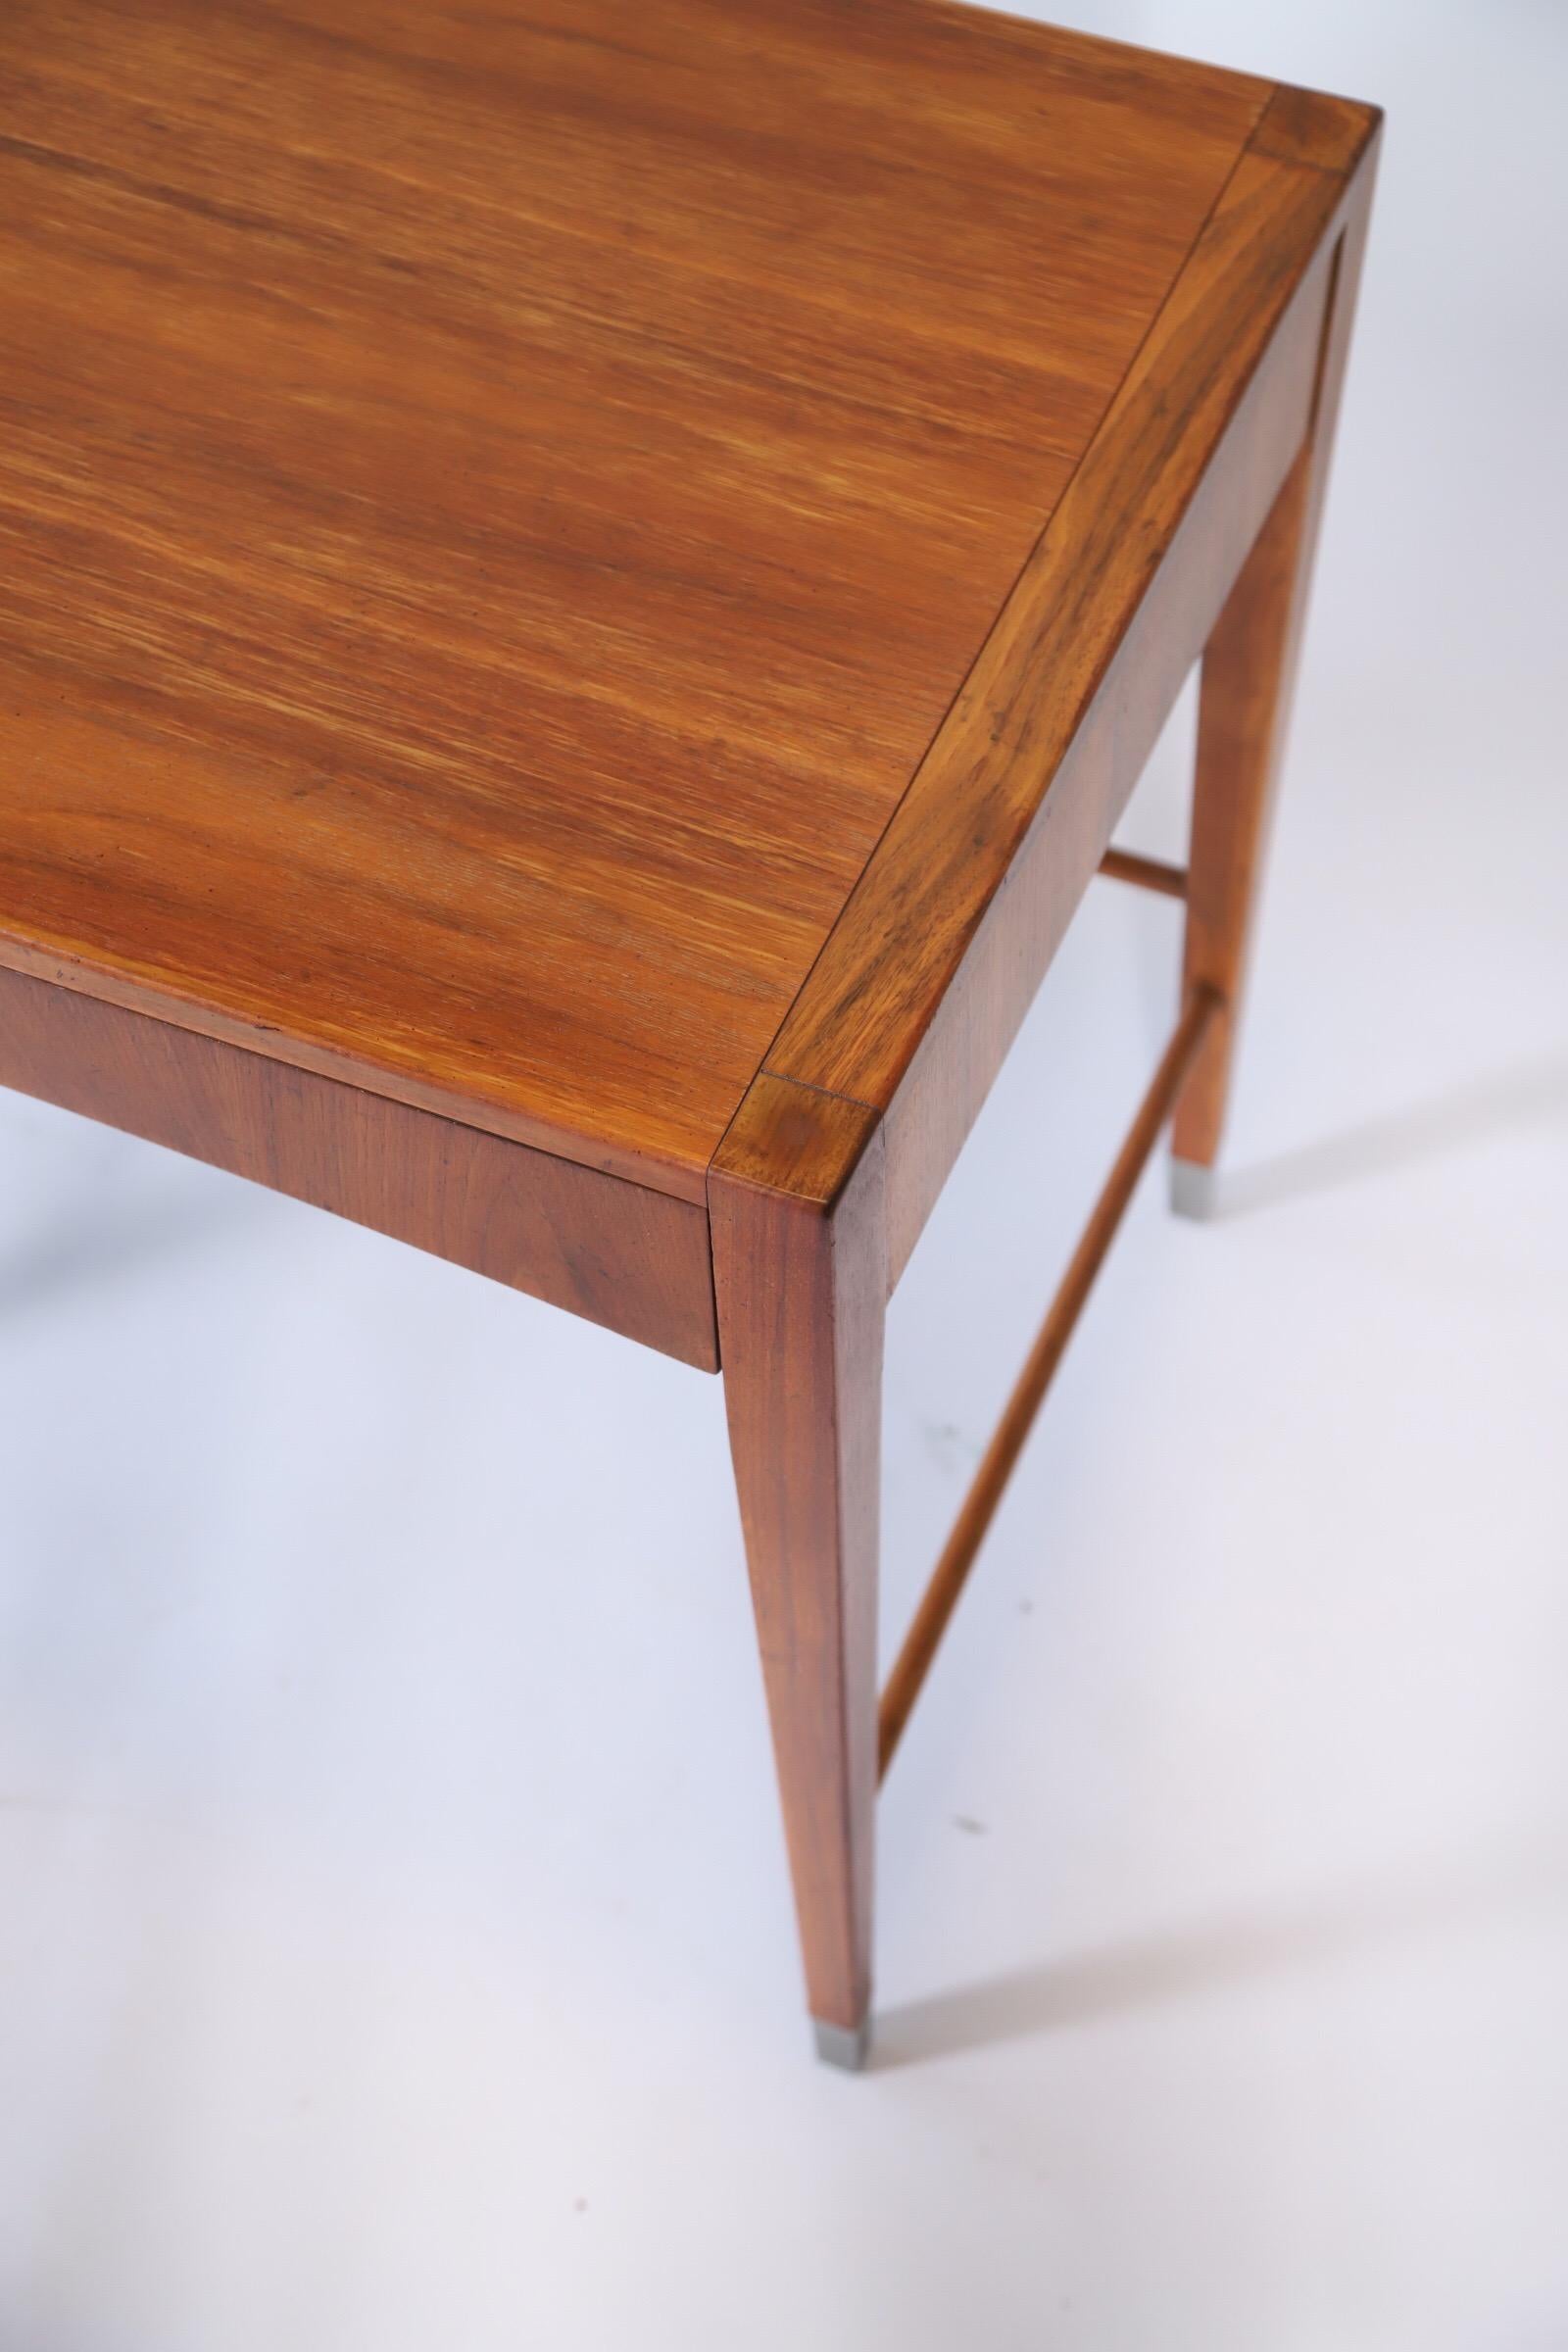 Mid-20th Century Writing Desk by Milling Road